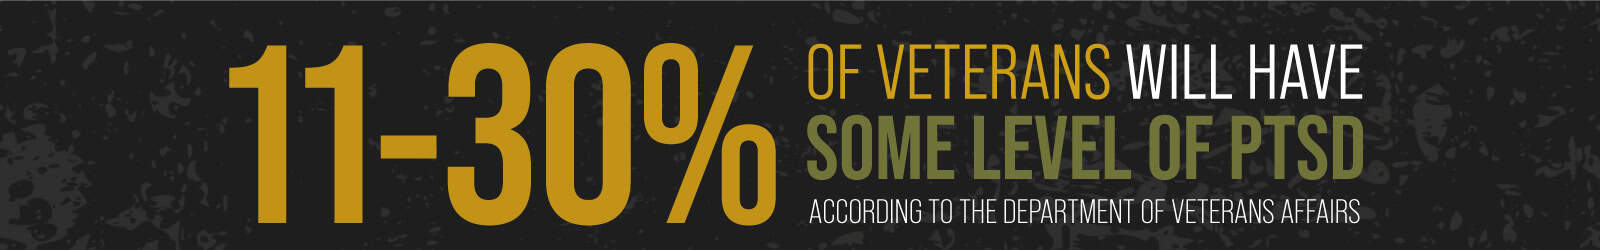 About 11 to 30 percent of veterans will have some level of PTSD, according to the Department of Veterans Affairs.